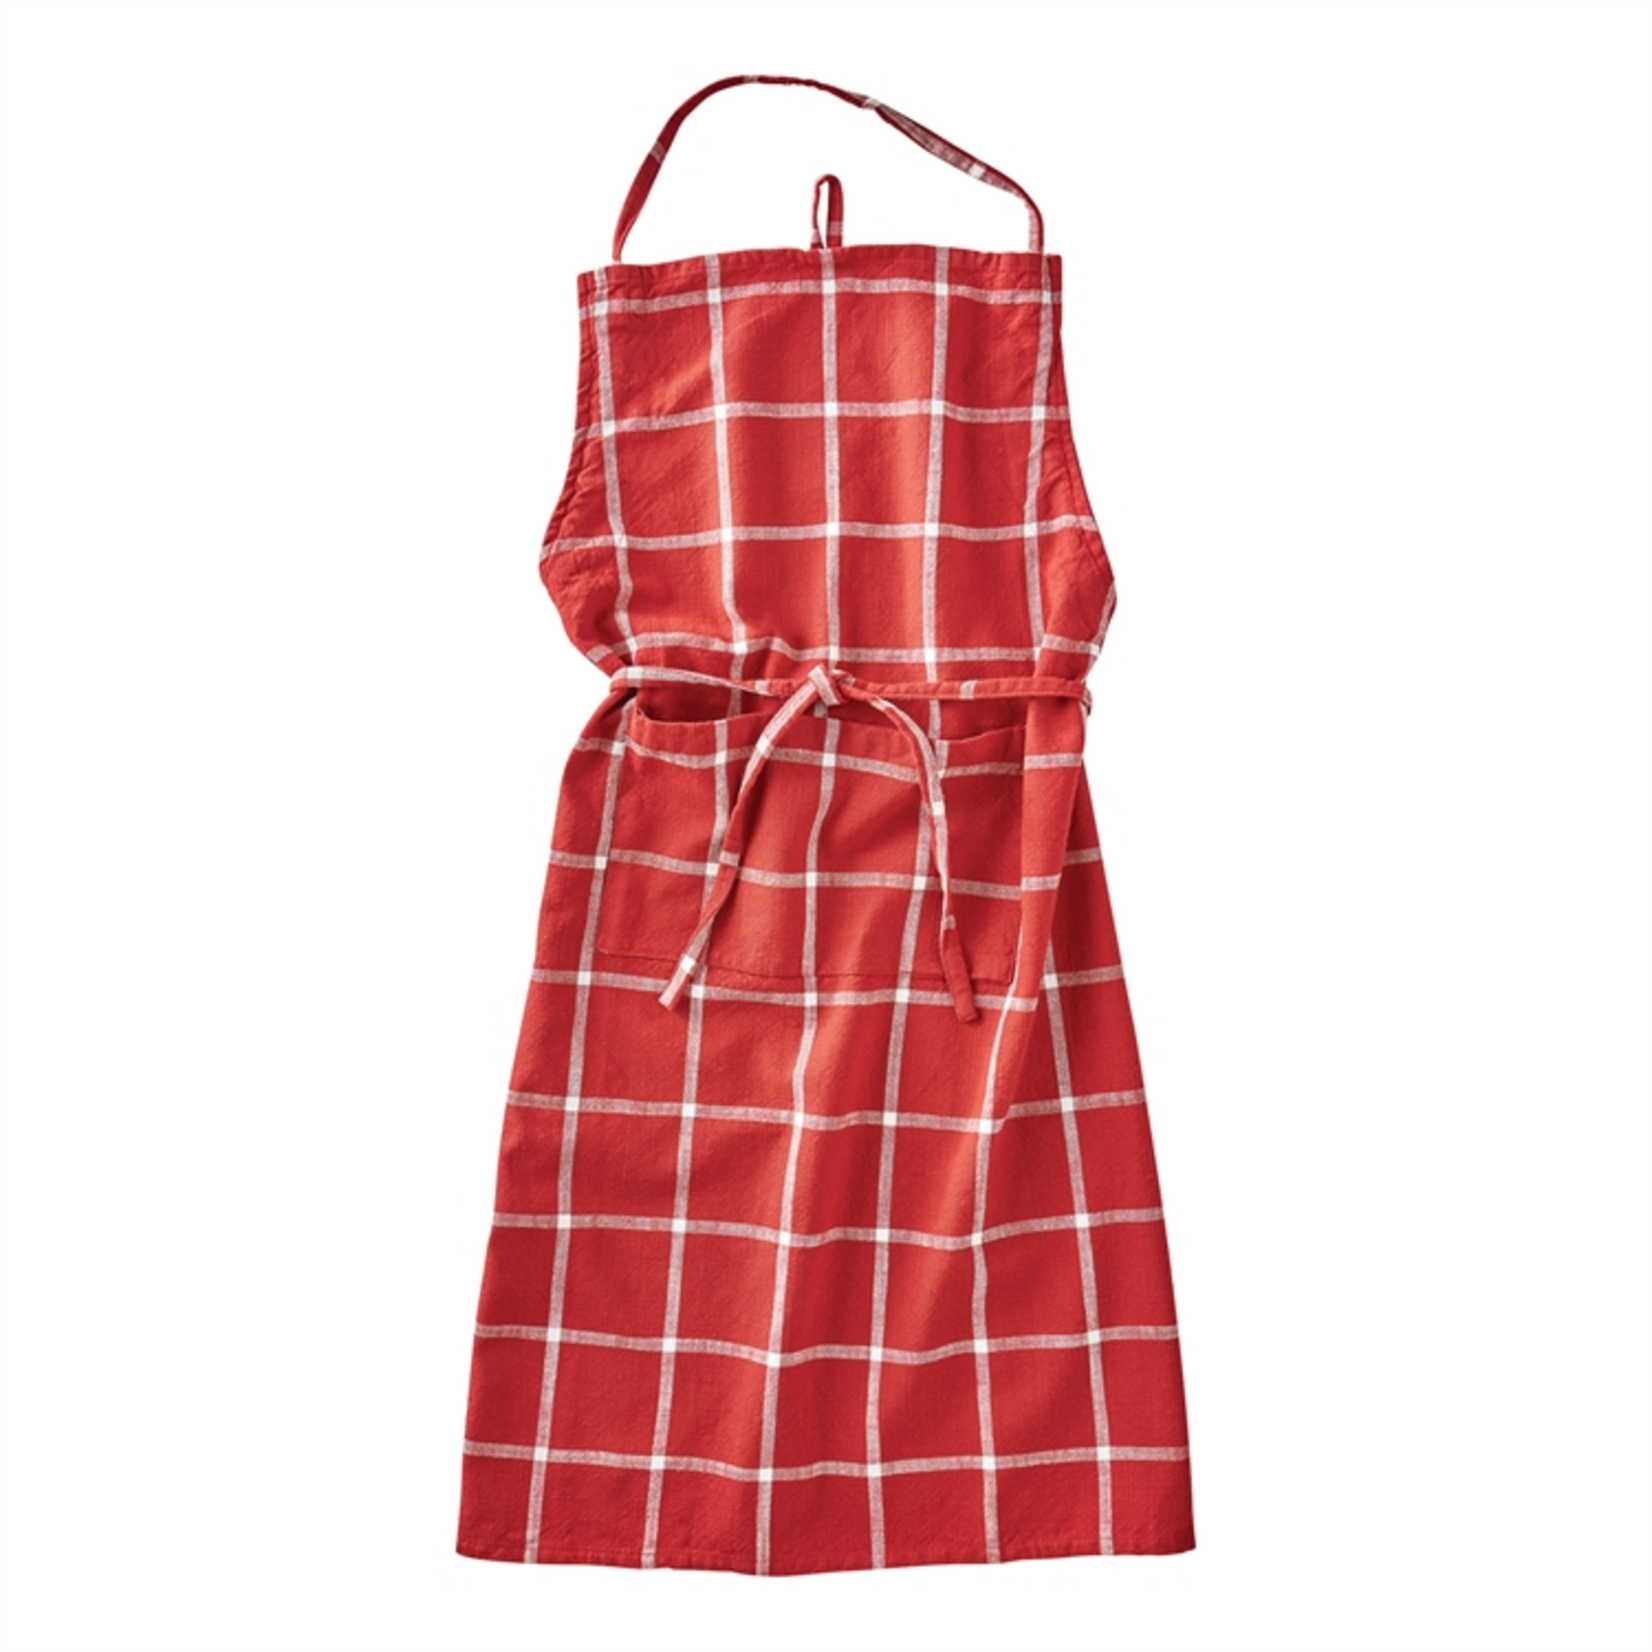 Tag Apron, Red Classic Check